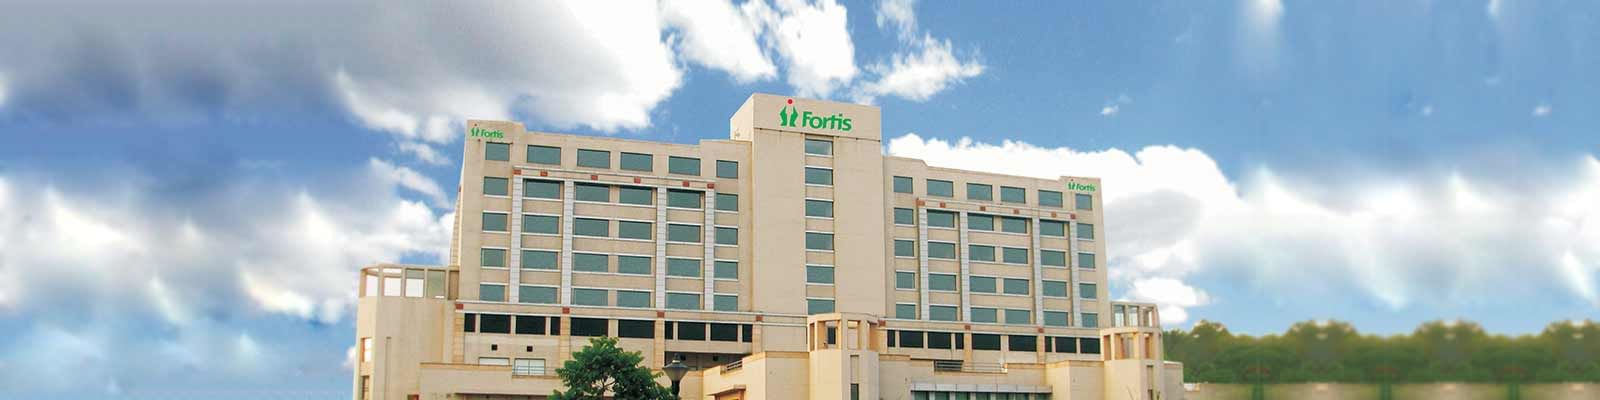 Fortis Escorts Hospital  (On Call)